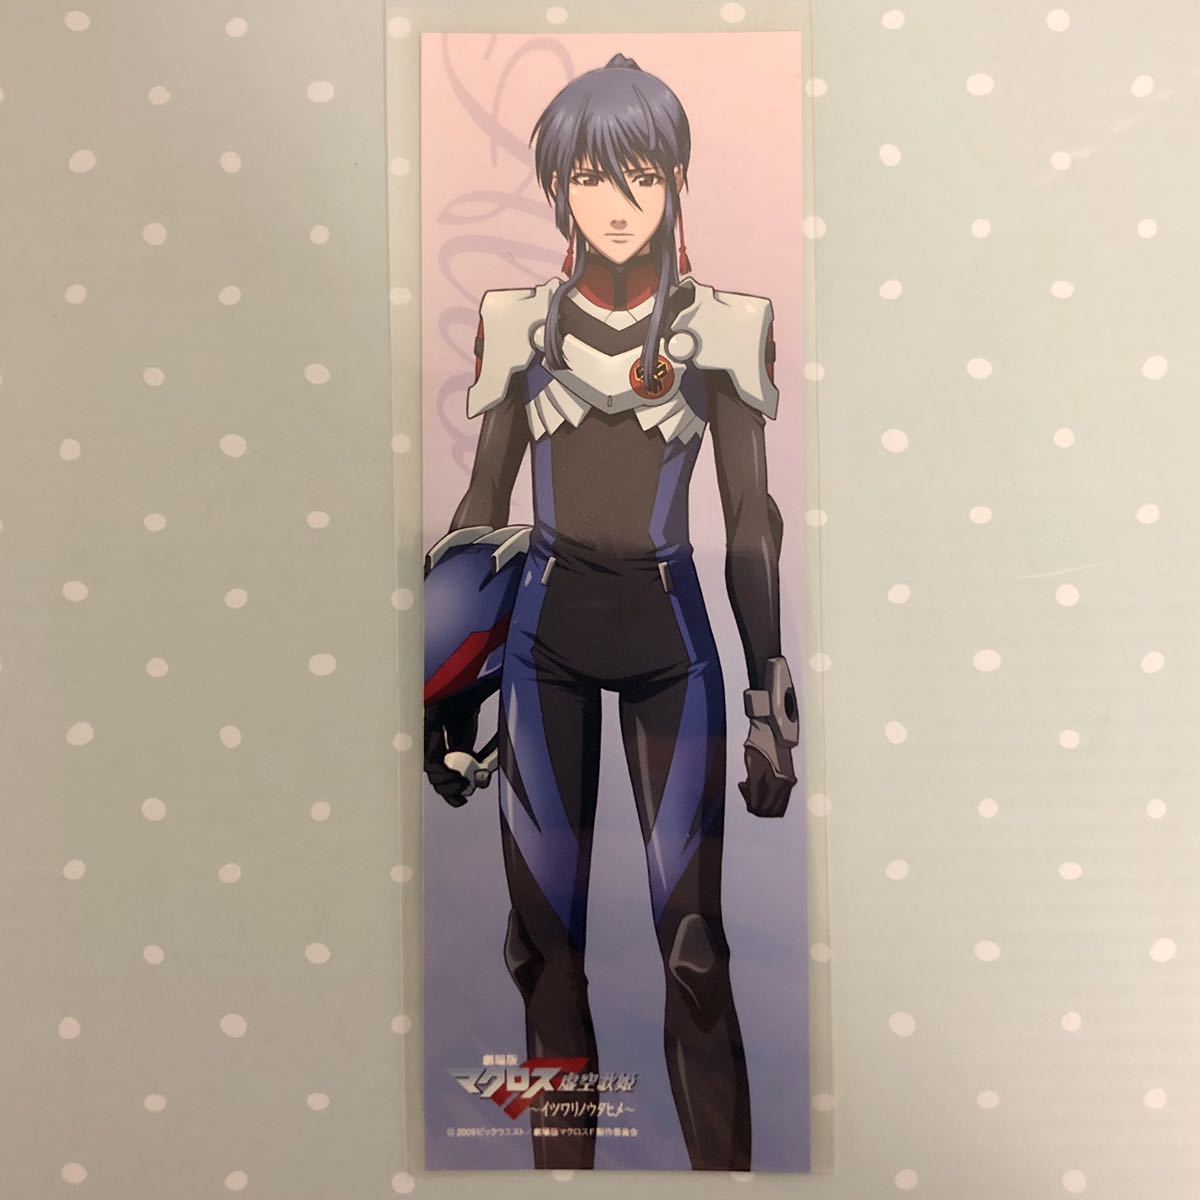  theater version Macross Fitsuwalinoutahime book mark crystal print go in place person privilege Alto 